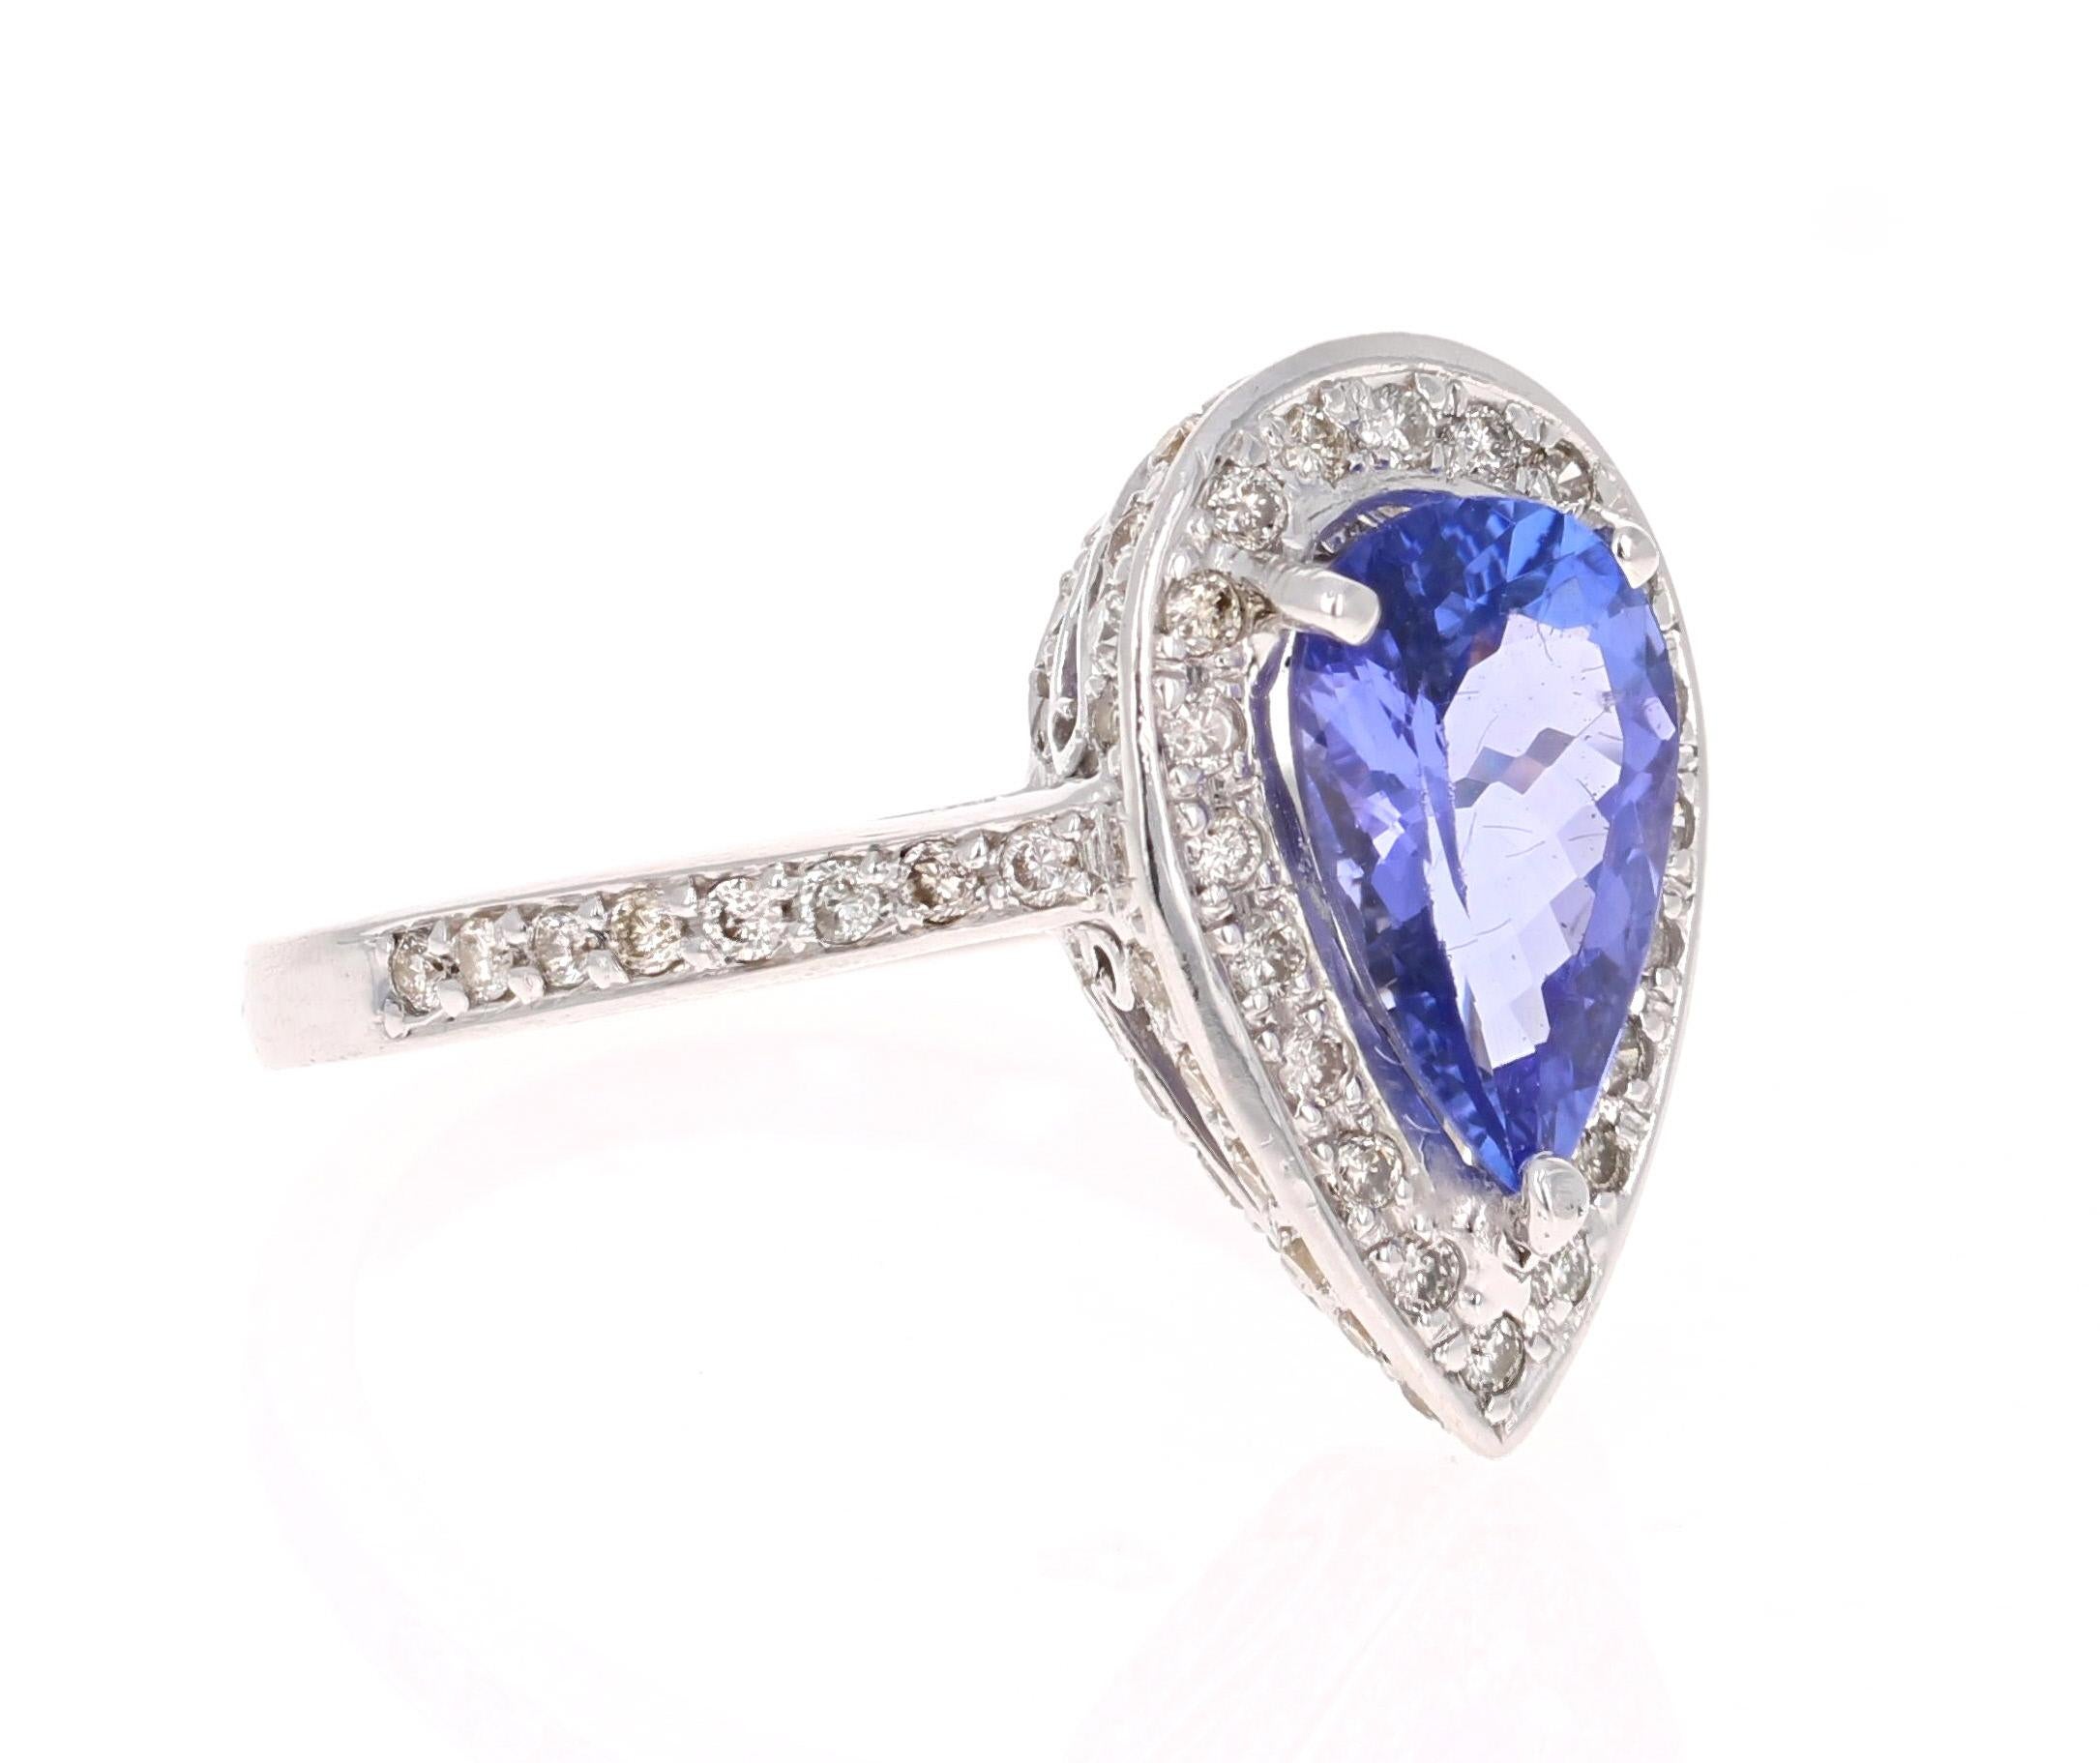 This ring has a gorgeous Pear Cut Tanzanite that weighs 1.67 Carats. It is surrounded by 97 Round Cut Diamonds that weigh 0.60 Carats. 

Elegantly set in 18 Karat White Gold and weighs approximately 5.4 grams 

The ring is a size 6 3/4 and can be